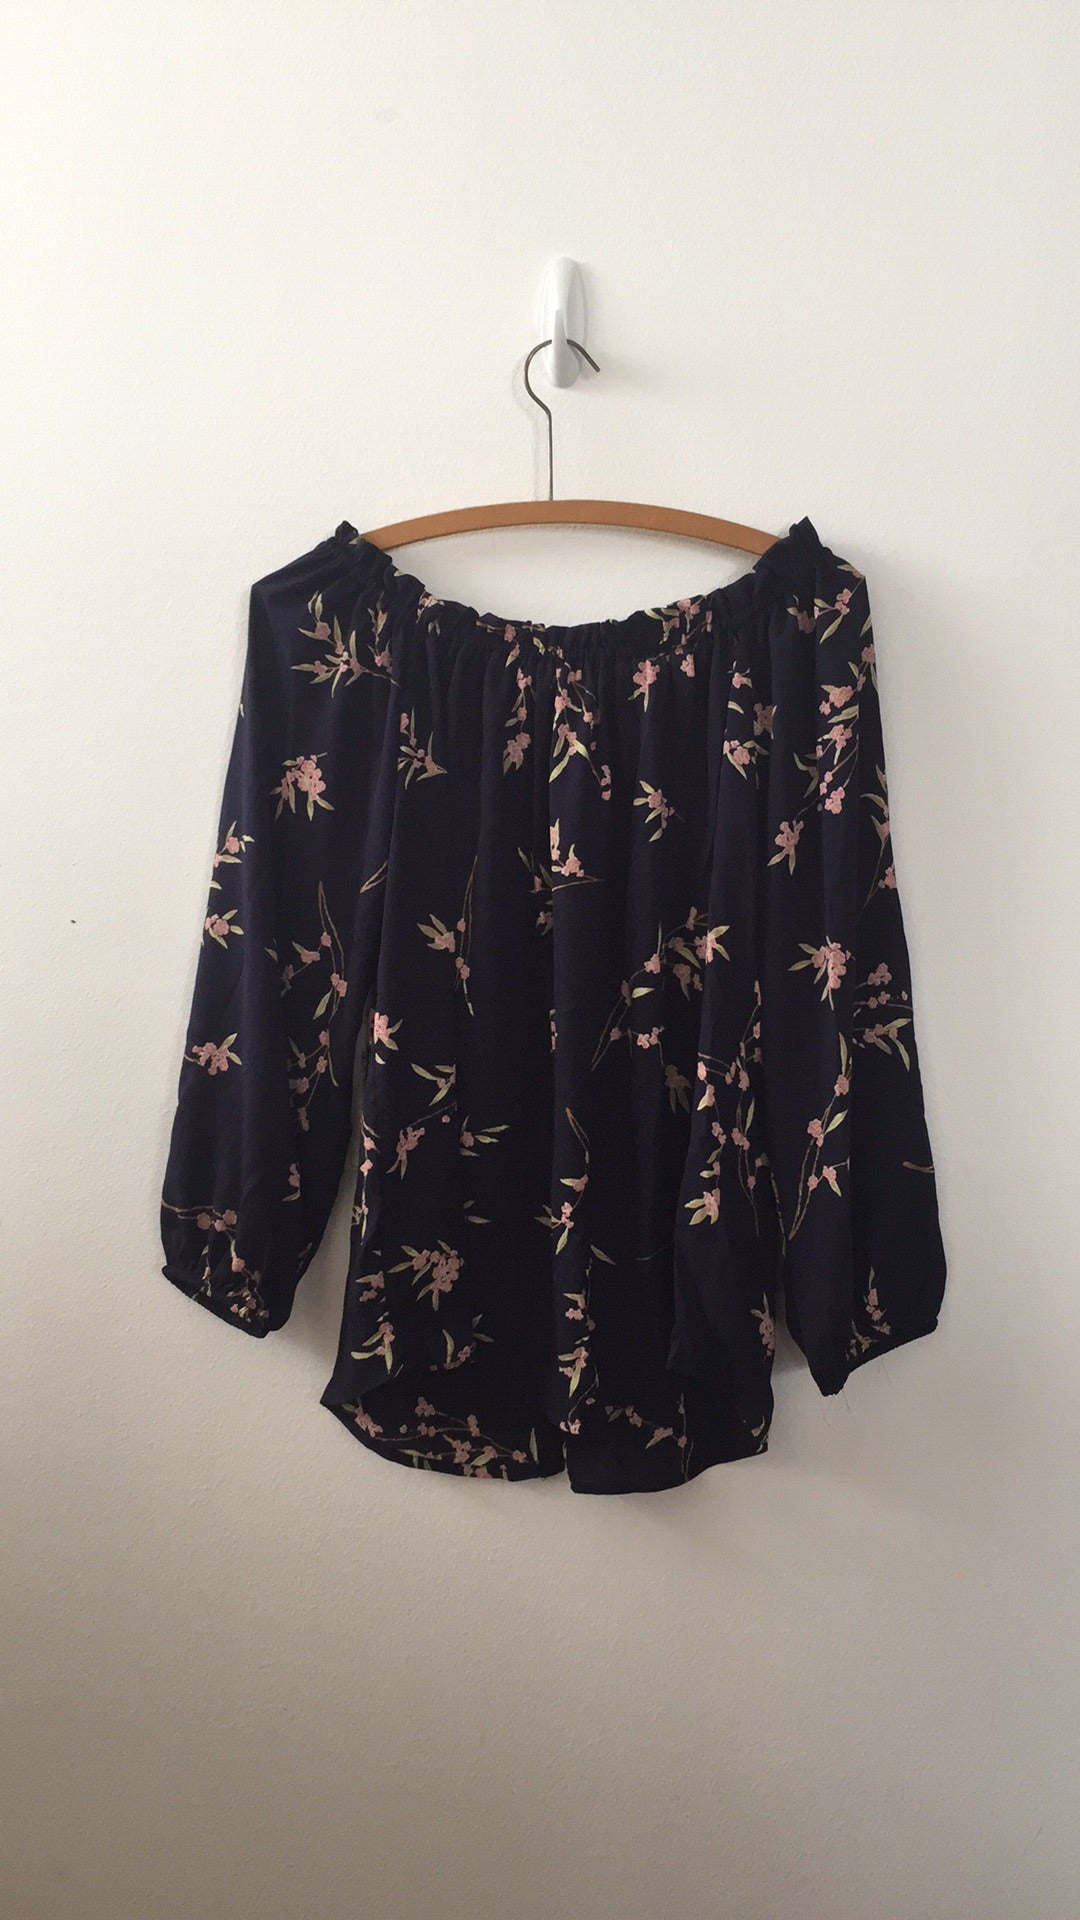 Cherry Blossom Off Shoulder Women's Top, Navy/Pink - The Giant Peach